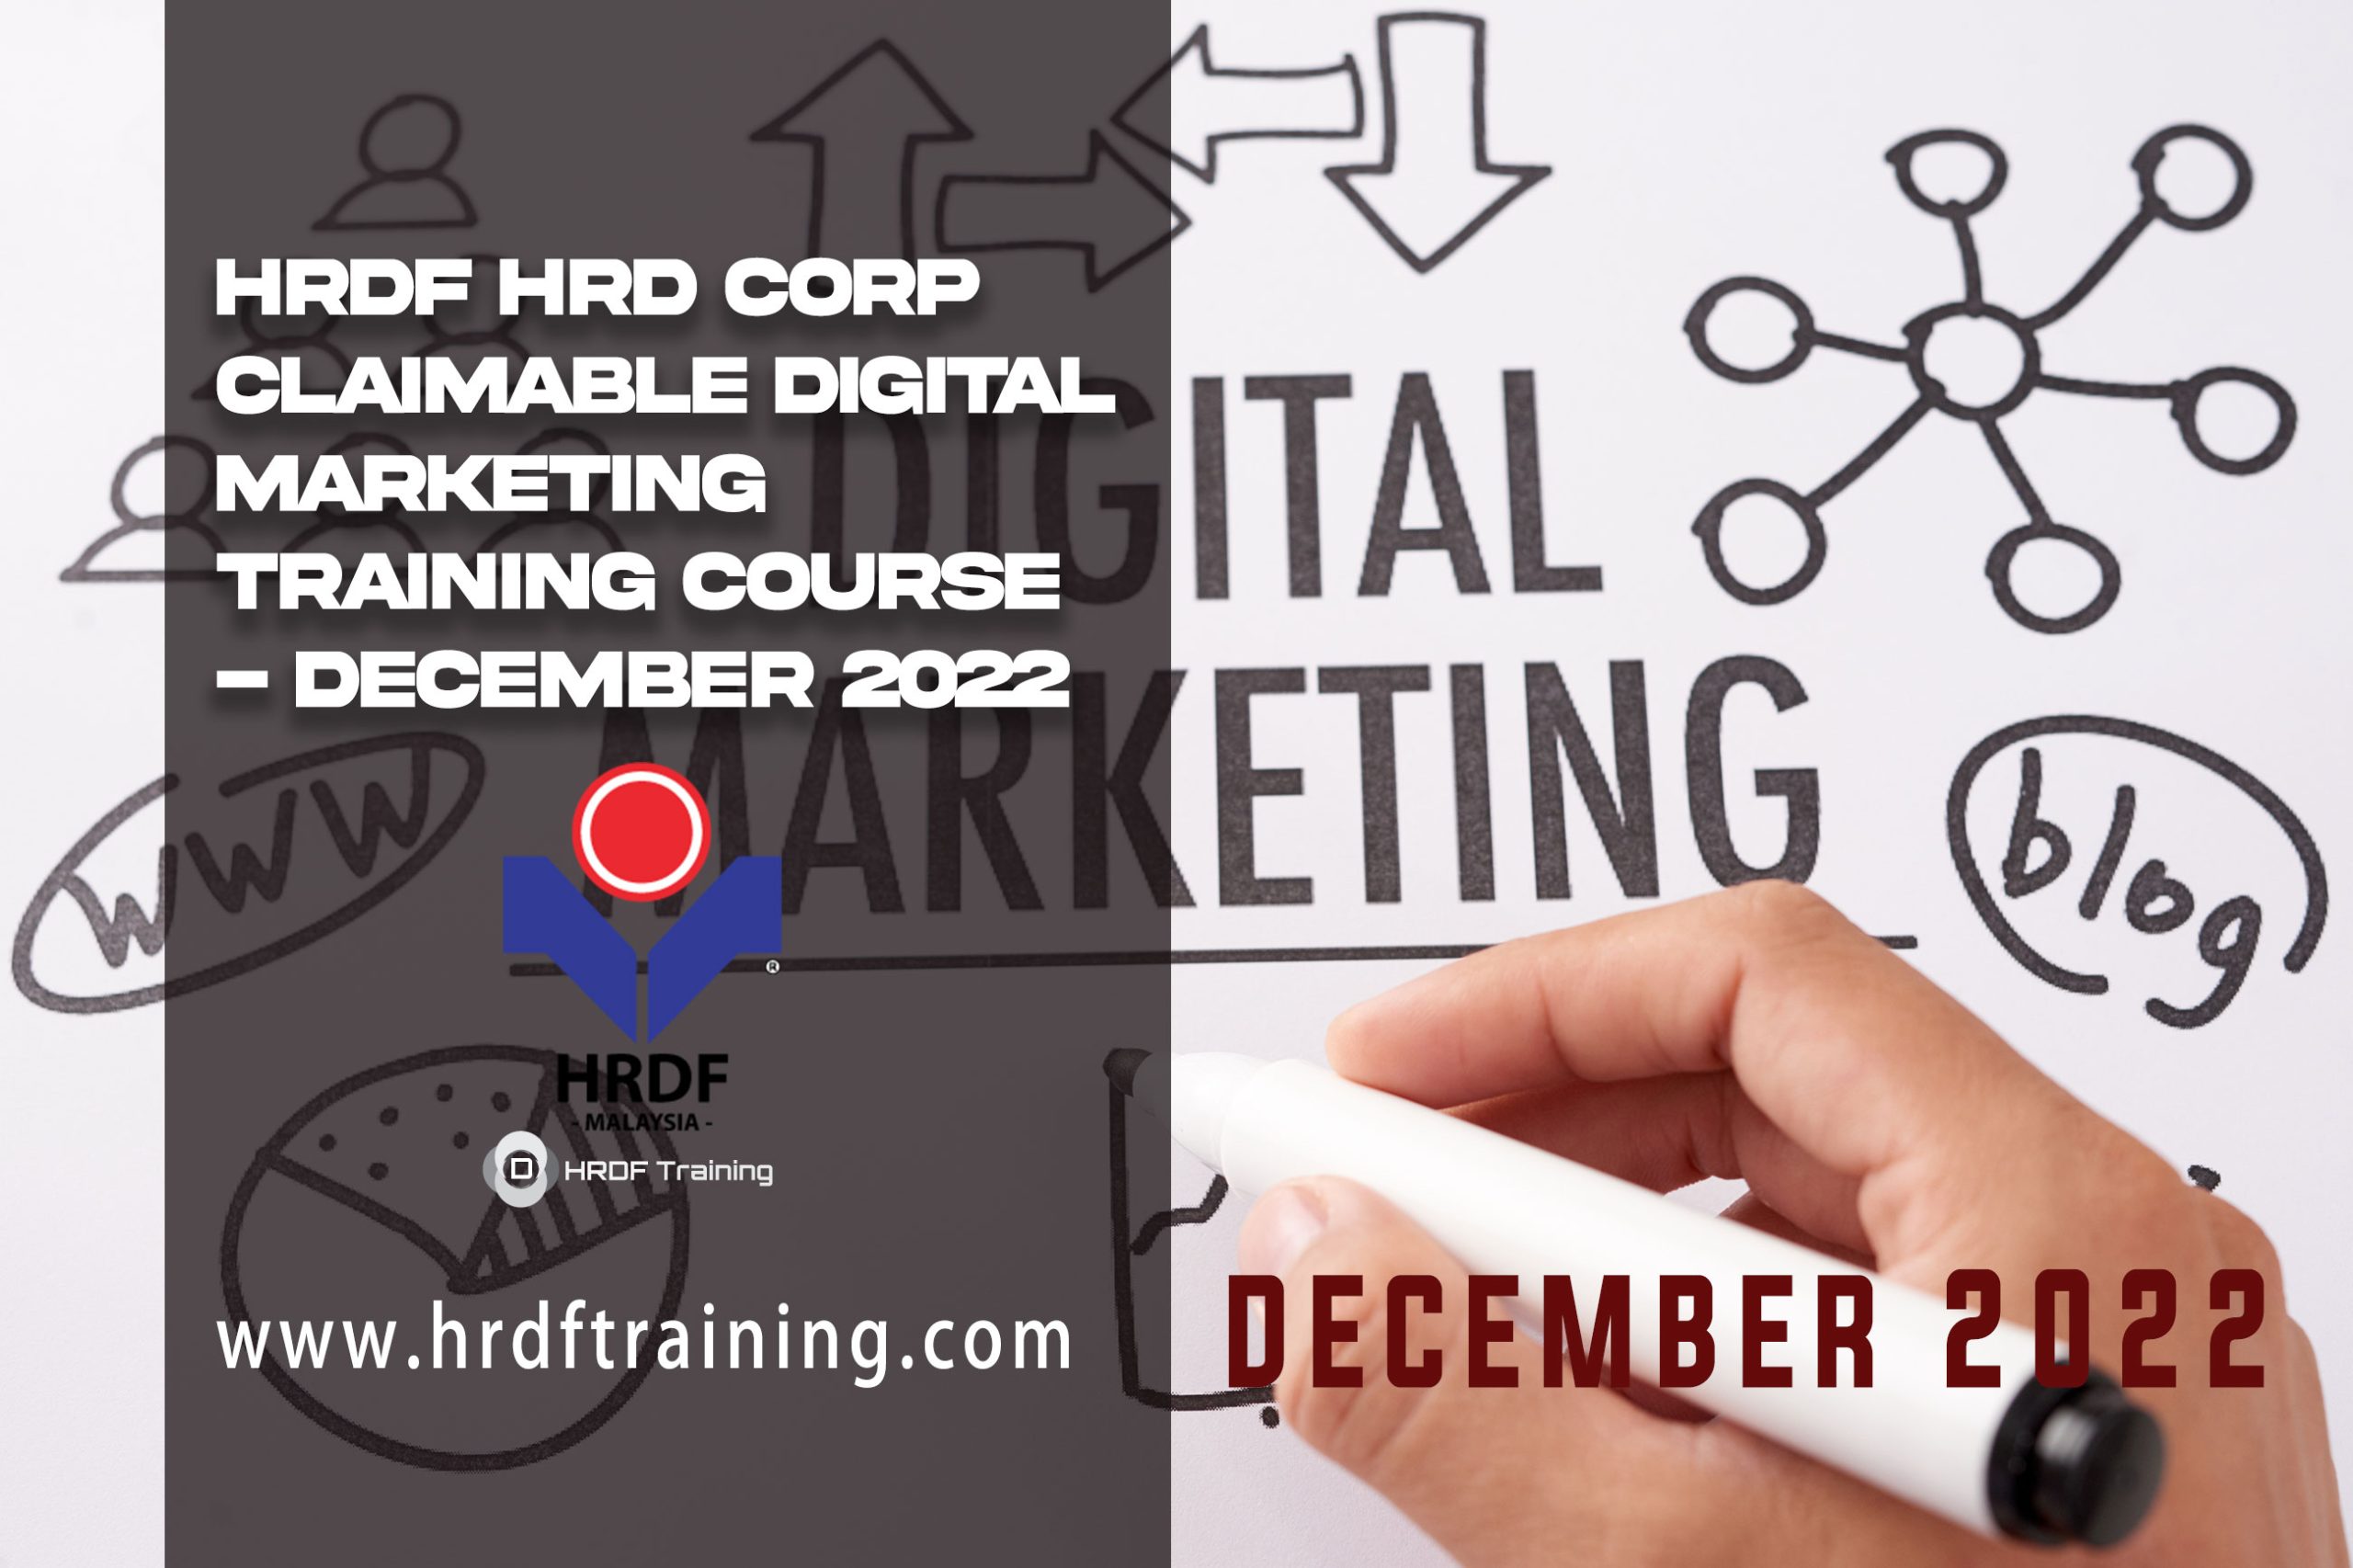 HRDF HRD Corp Claimable Digital Marketing Training Course - December 2022